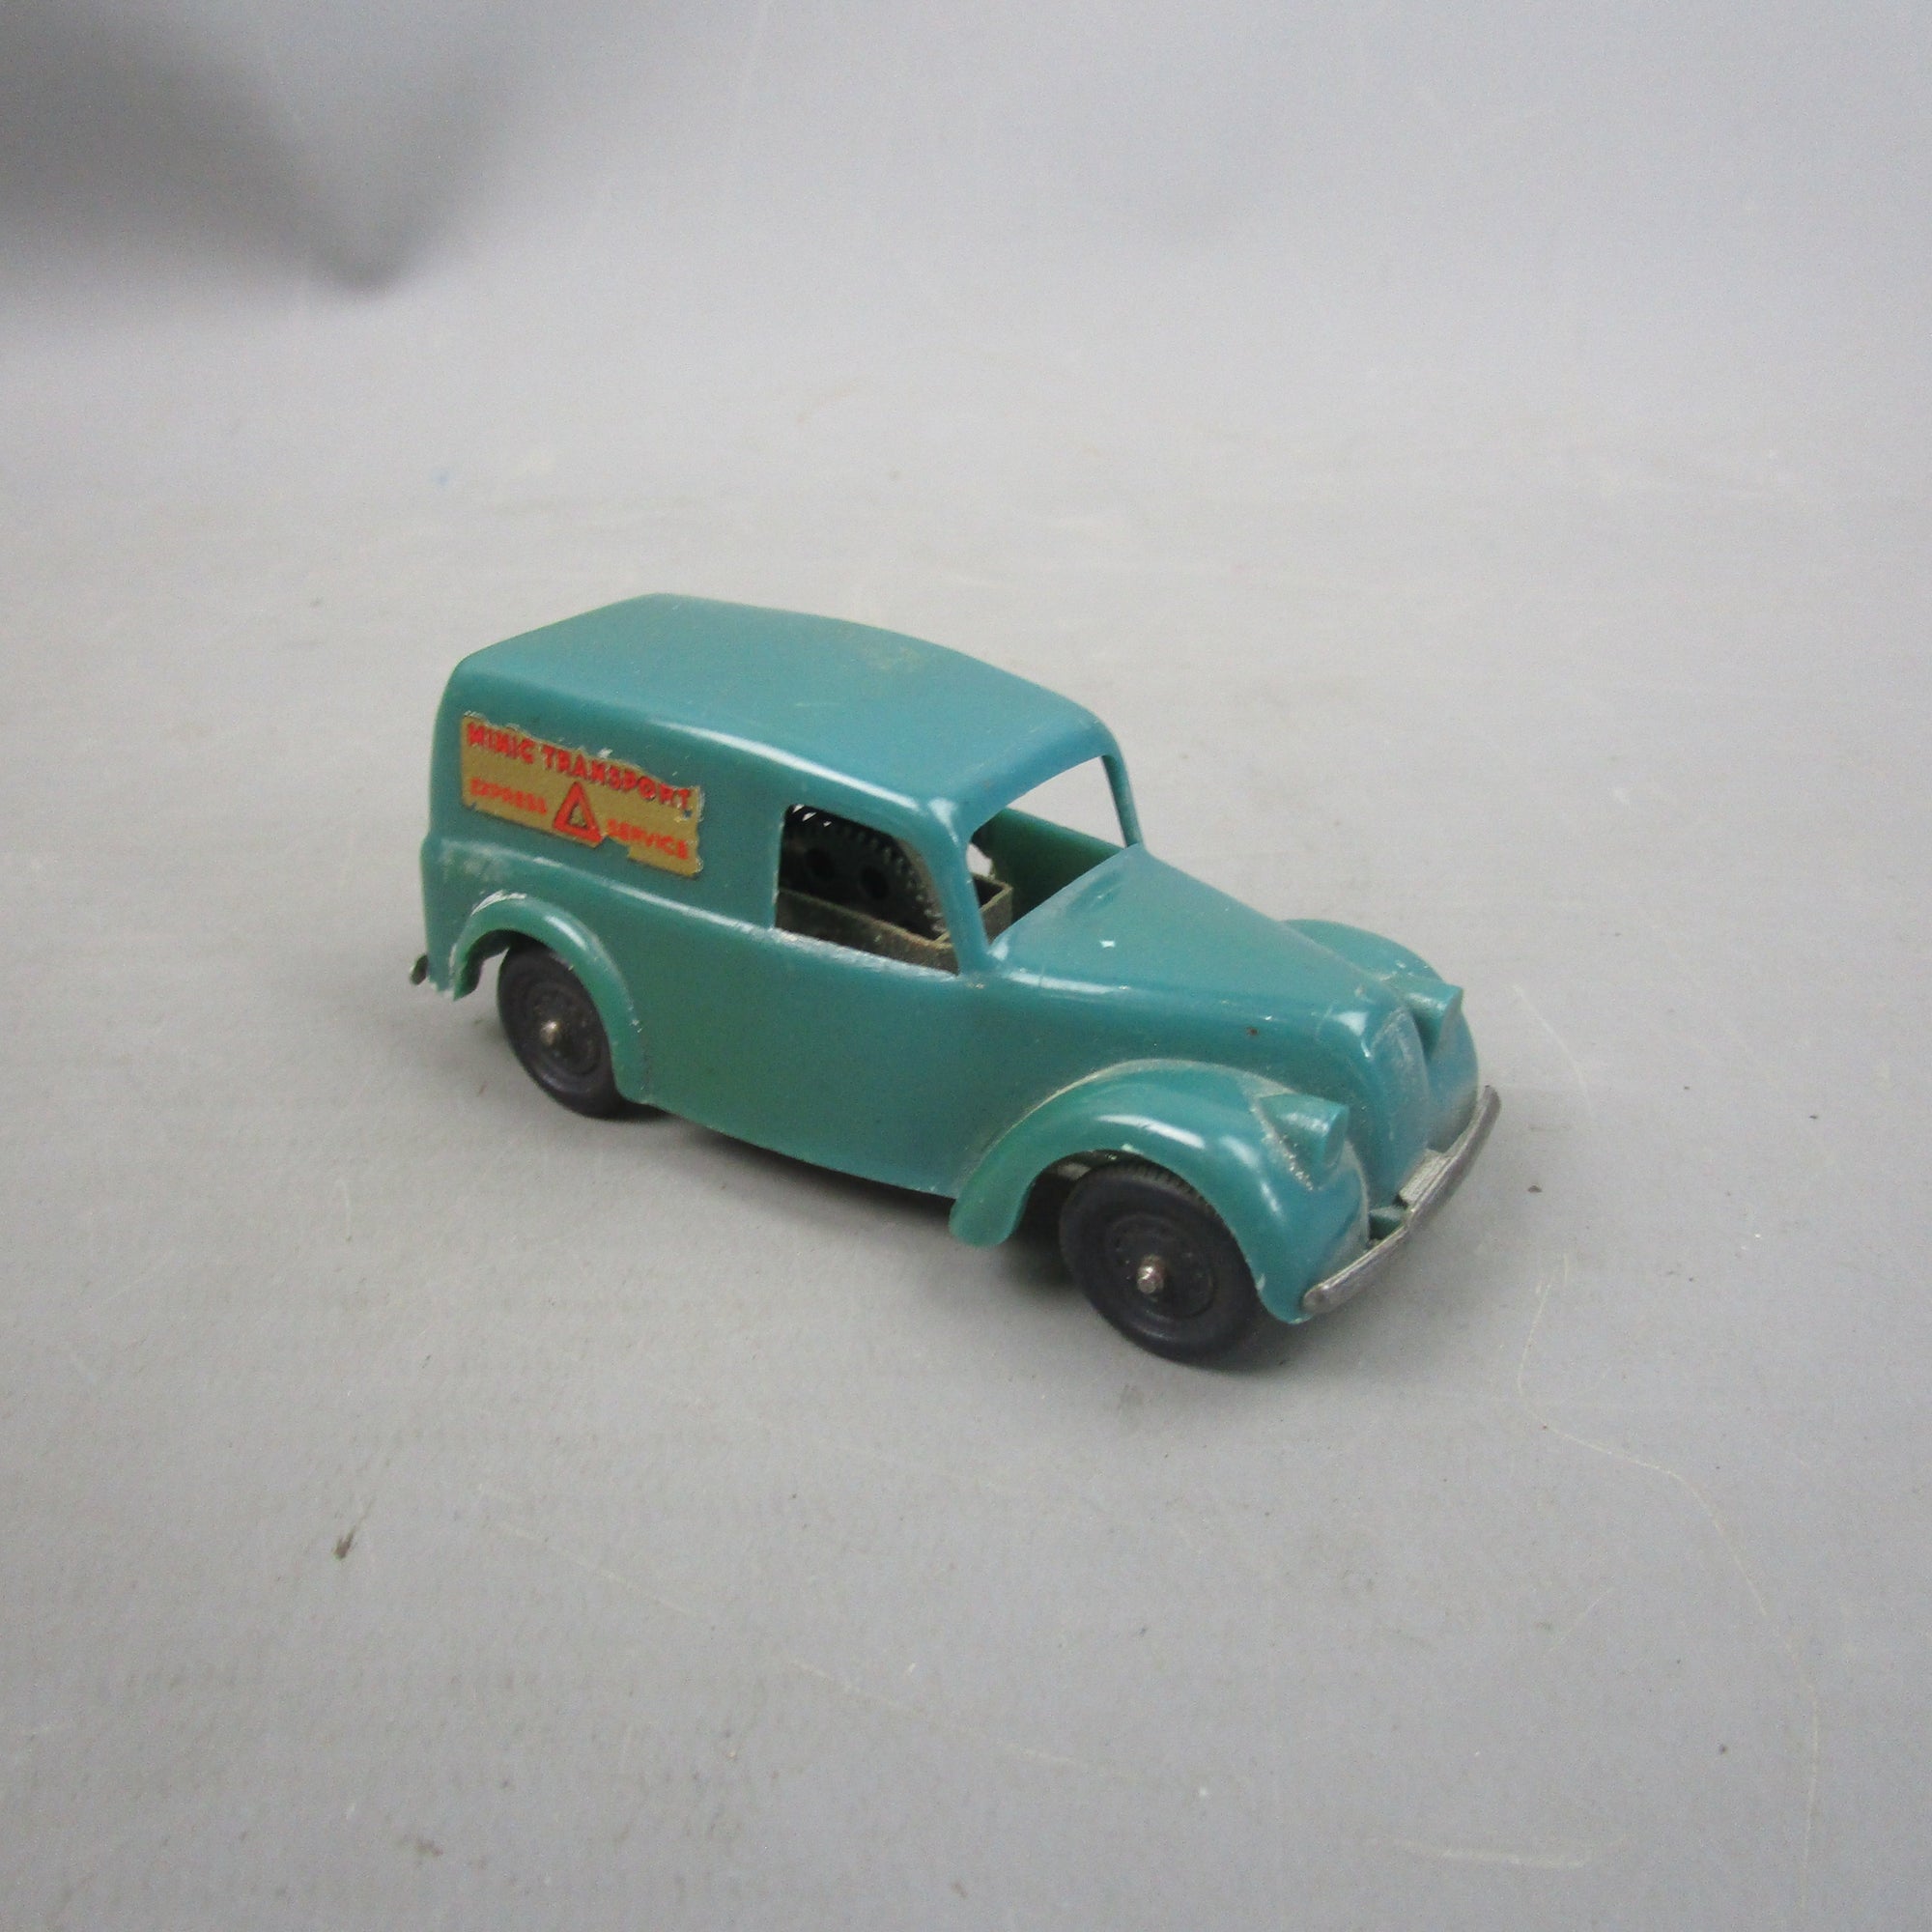 Triang Minic Express Service Teal Toy Car Vintage c1960